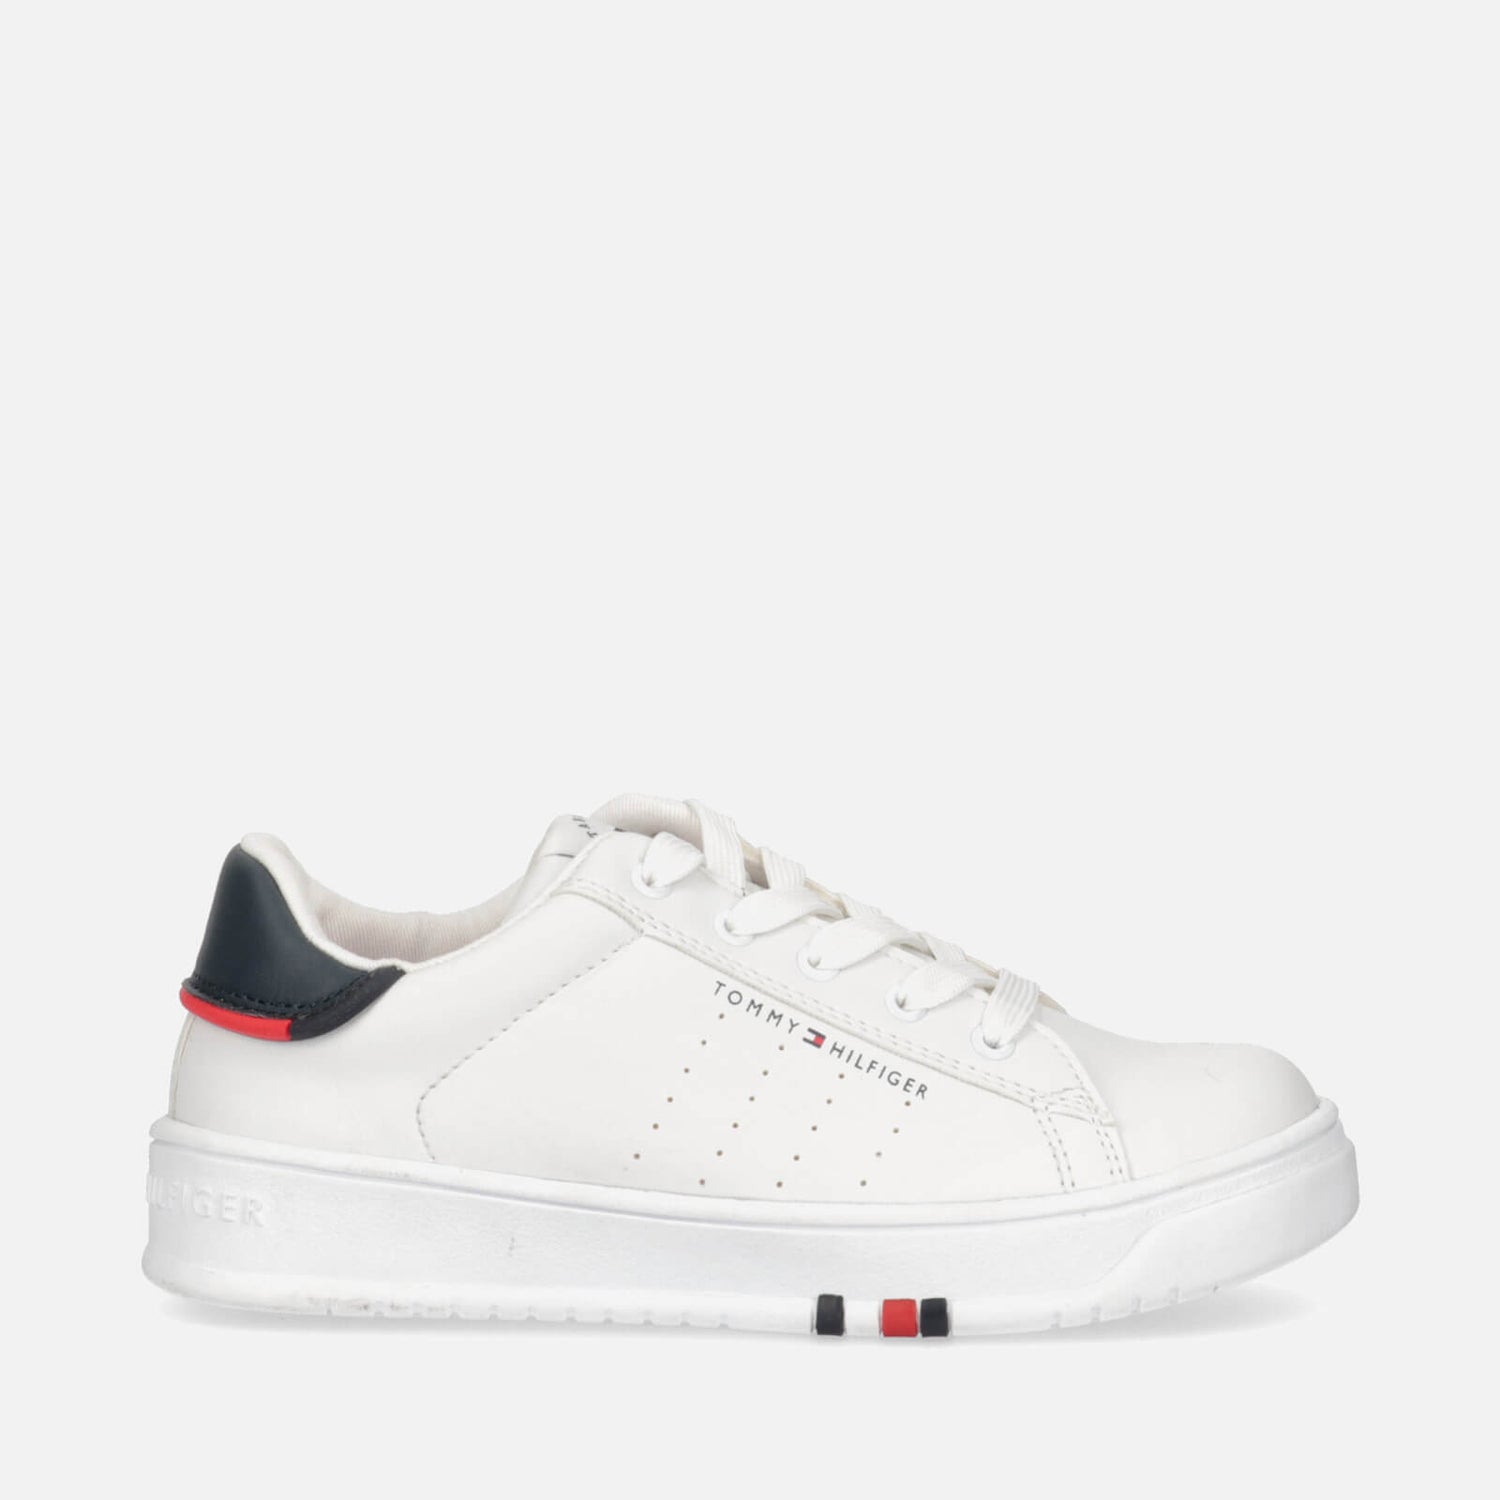 Tommy Hilfiger Kids' Faux Leather Trainers - UK 1 Kids